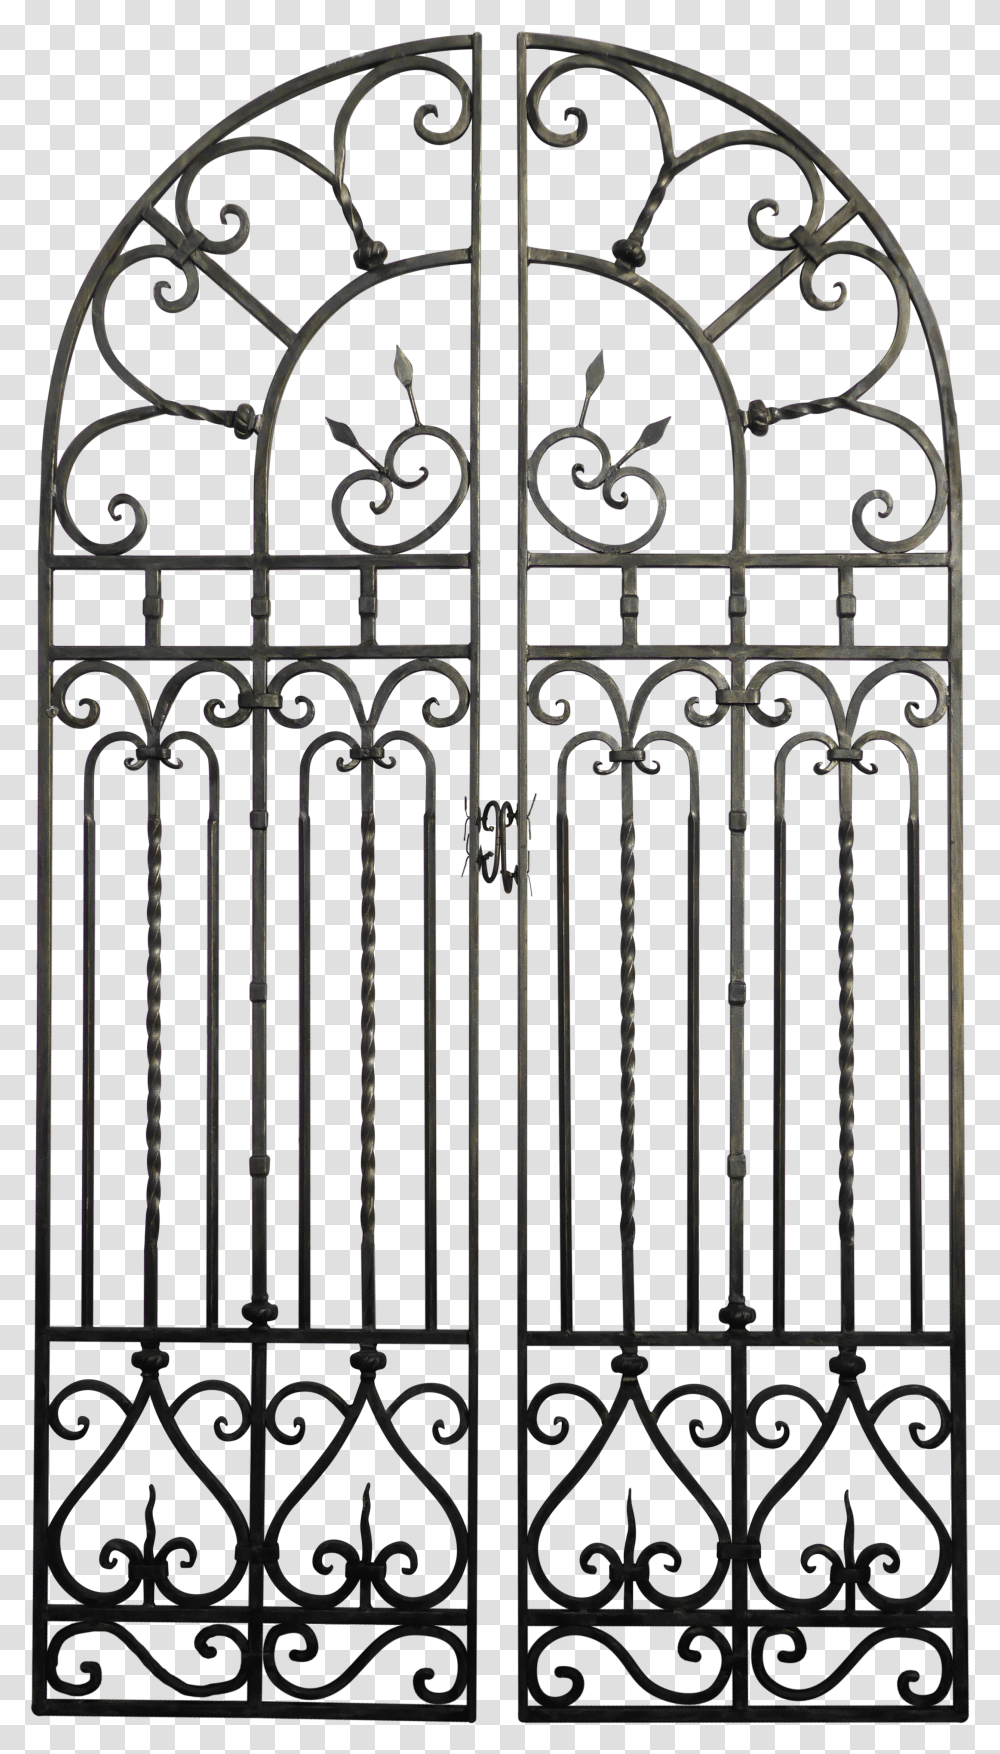 Iron Fence Wrought Iron Gate Transparent Png